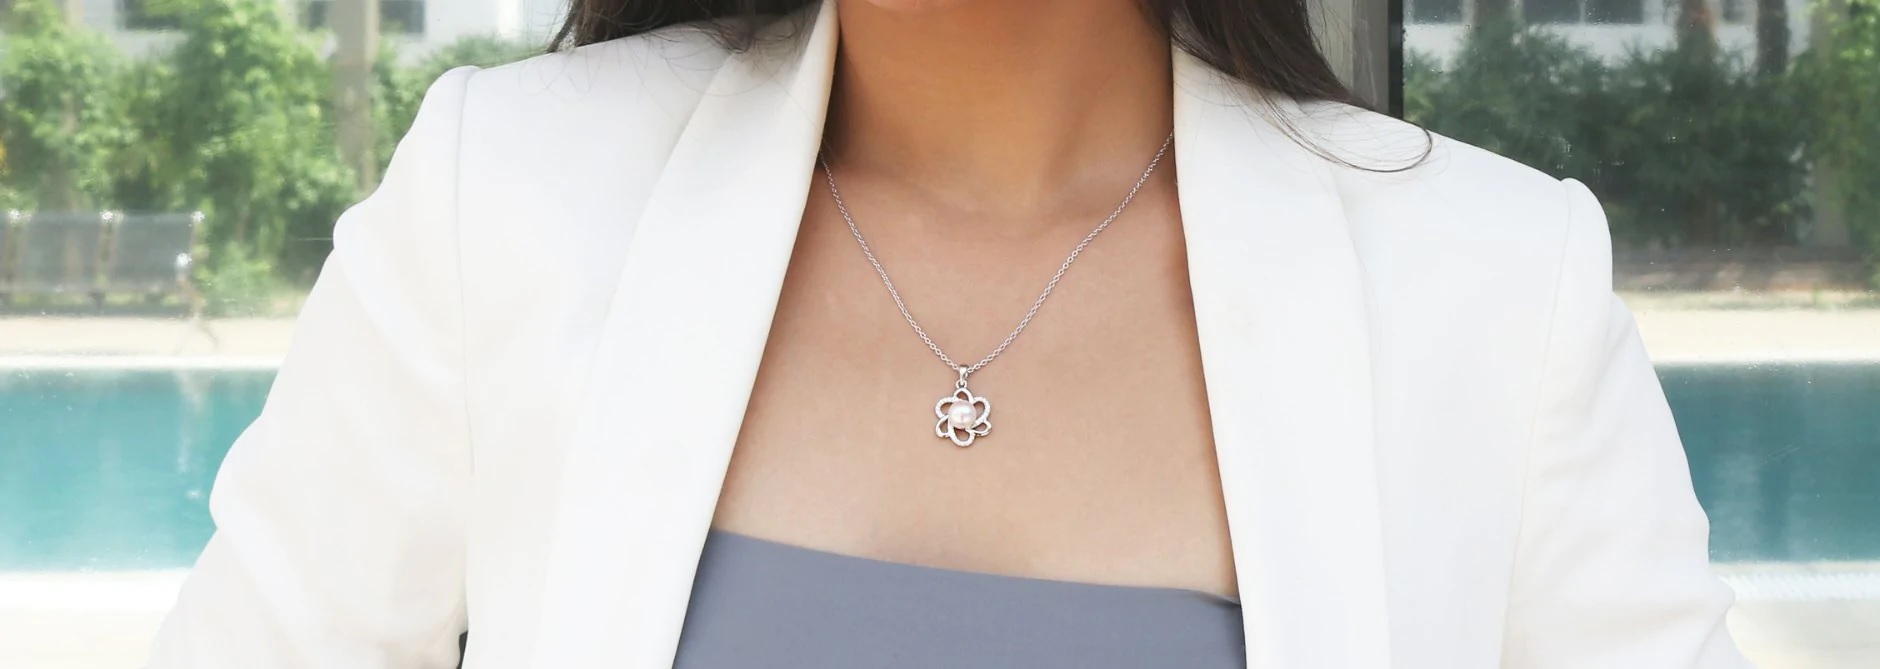 How To Pick The Perfect Necklace For Your Style